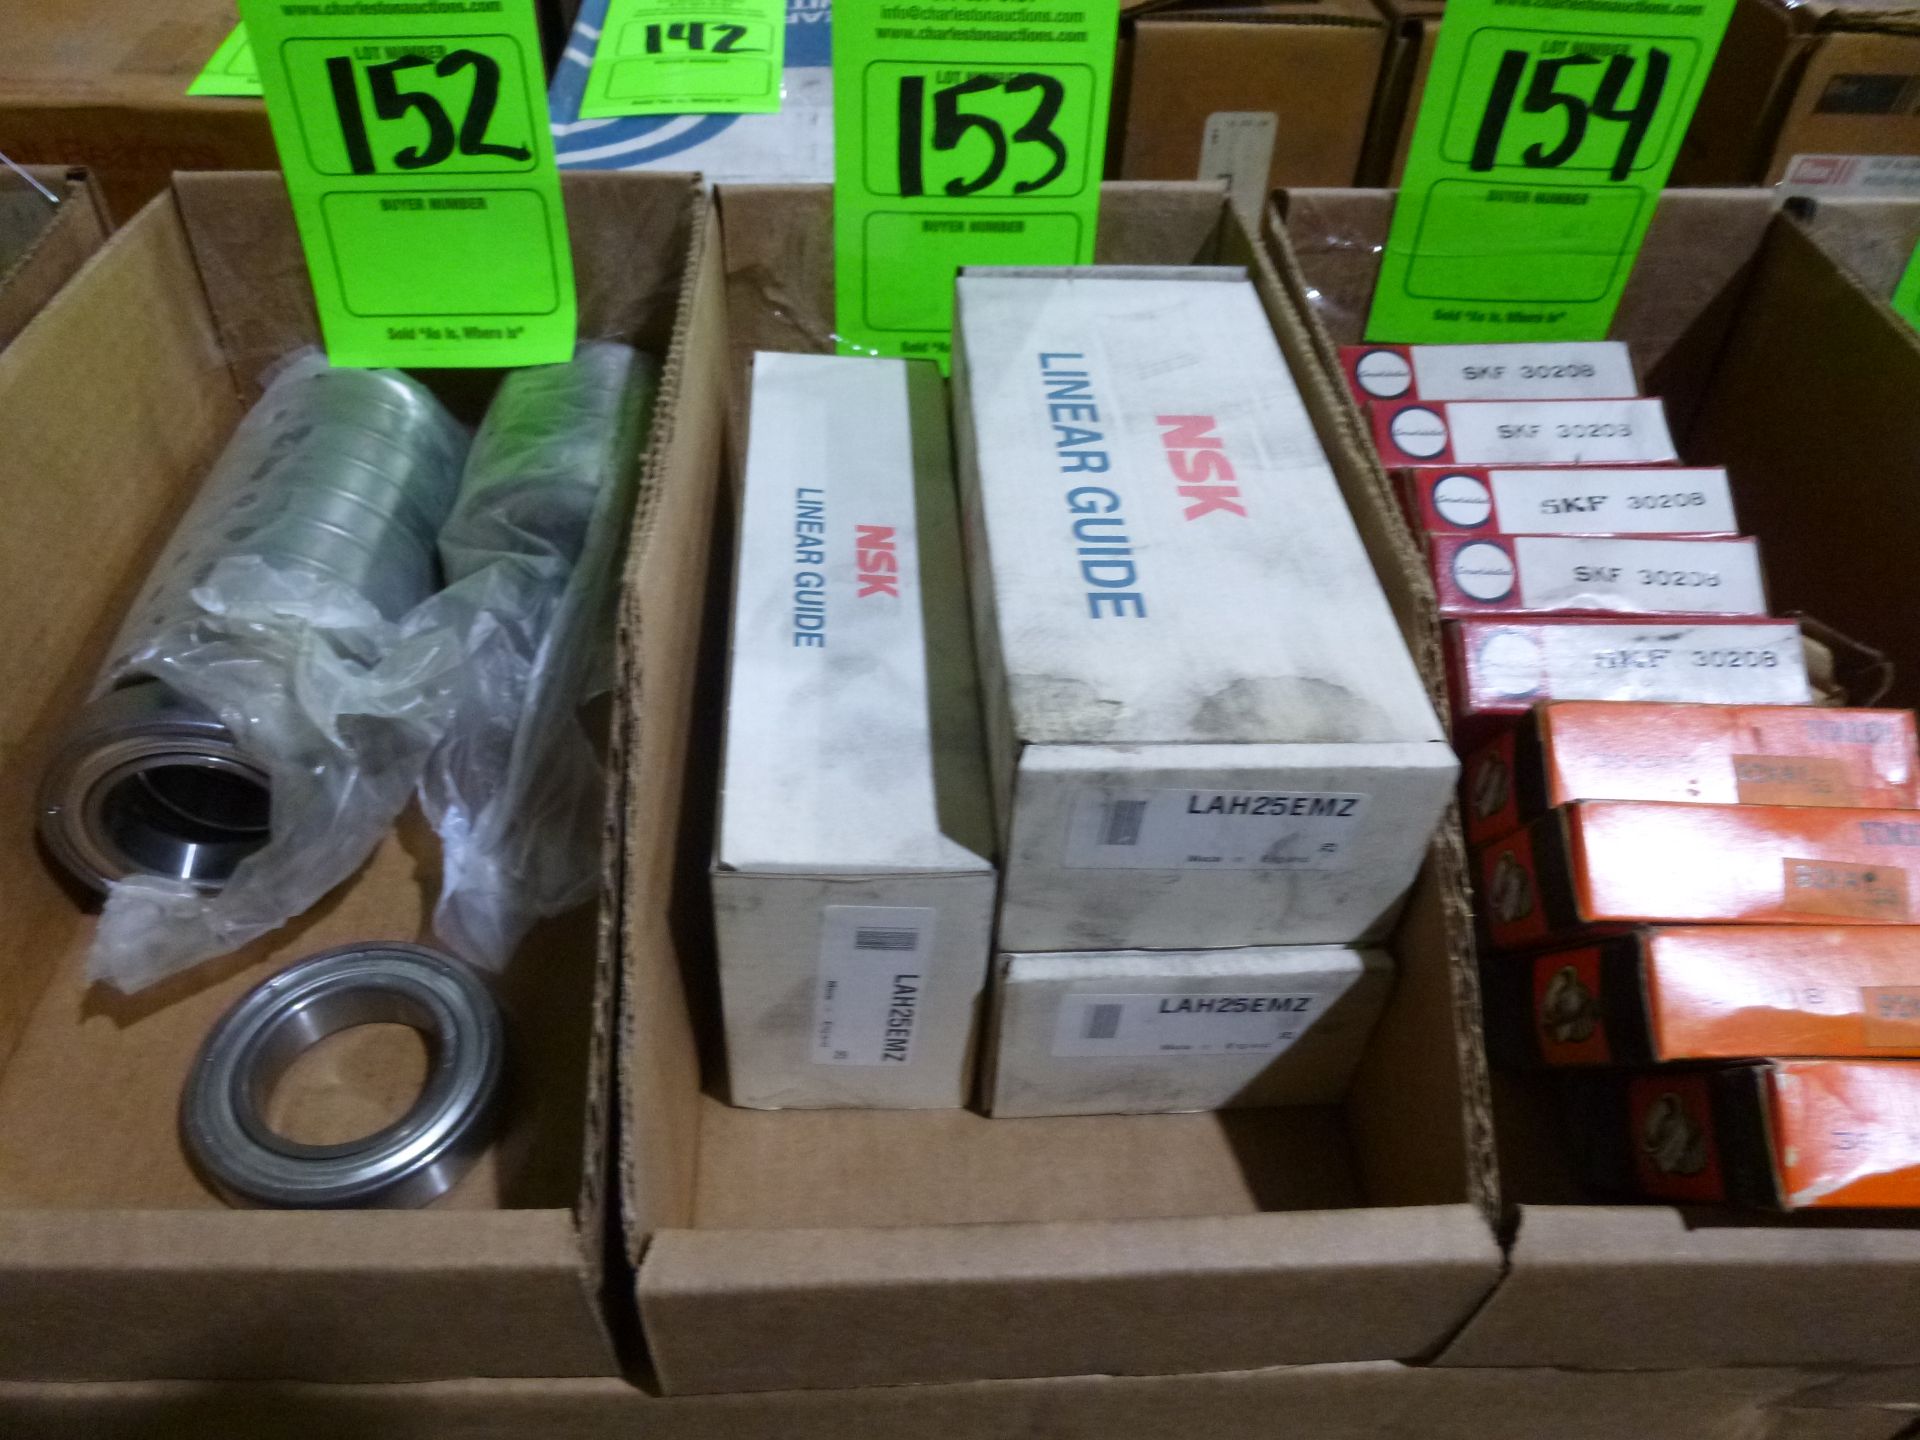 Qty 3 NSK linear slide bearings model LAH25EMZ, new in boxes, as always with Brolyn LLC auctions,